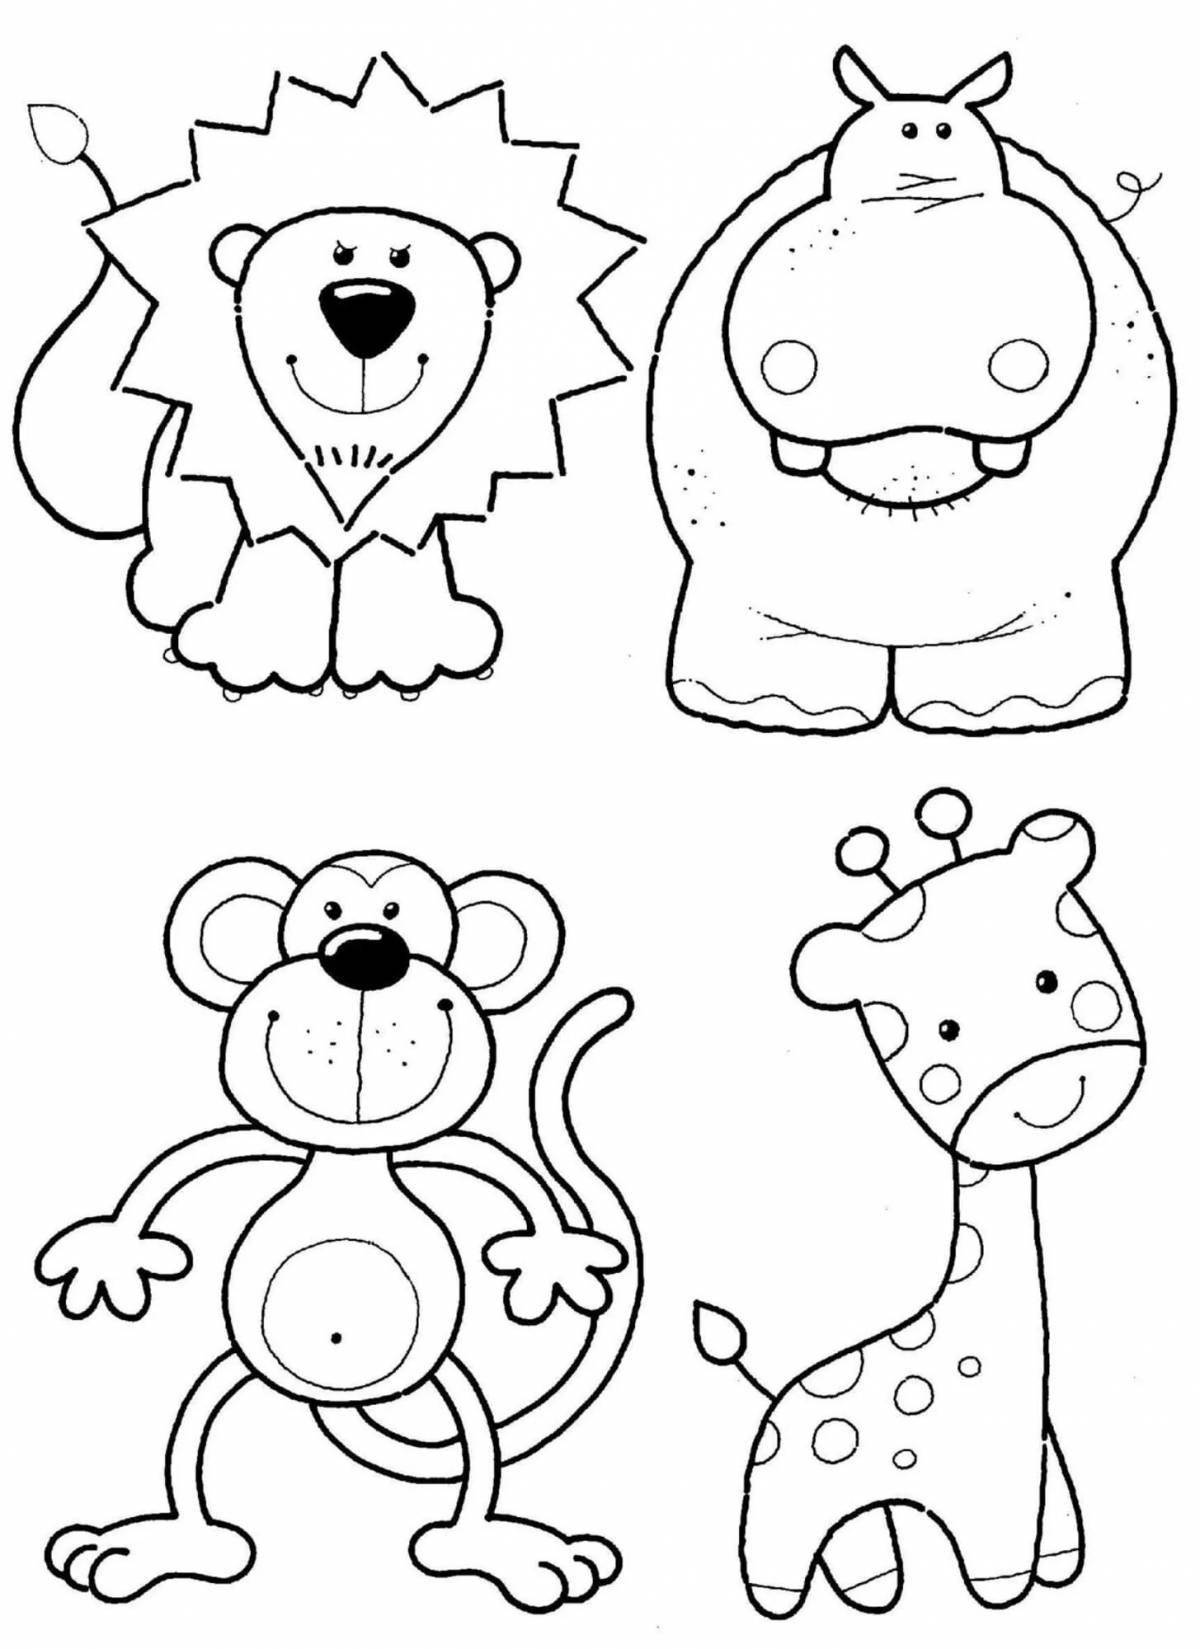 Bright coloring pages by themselves